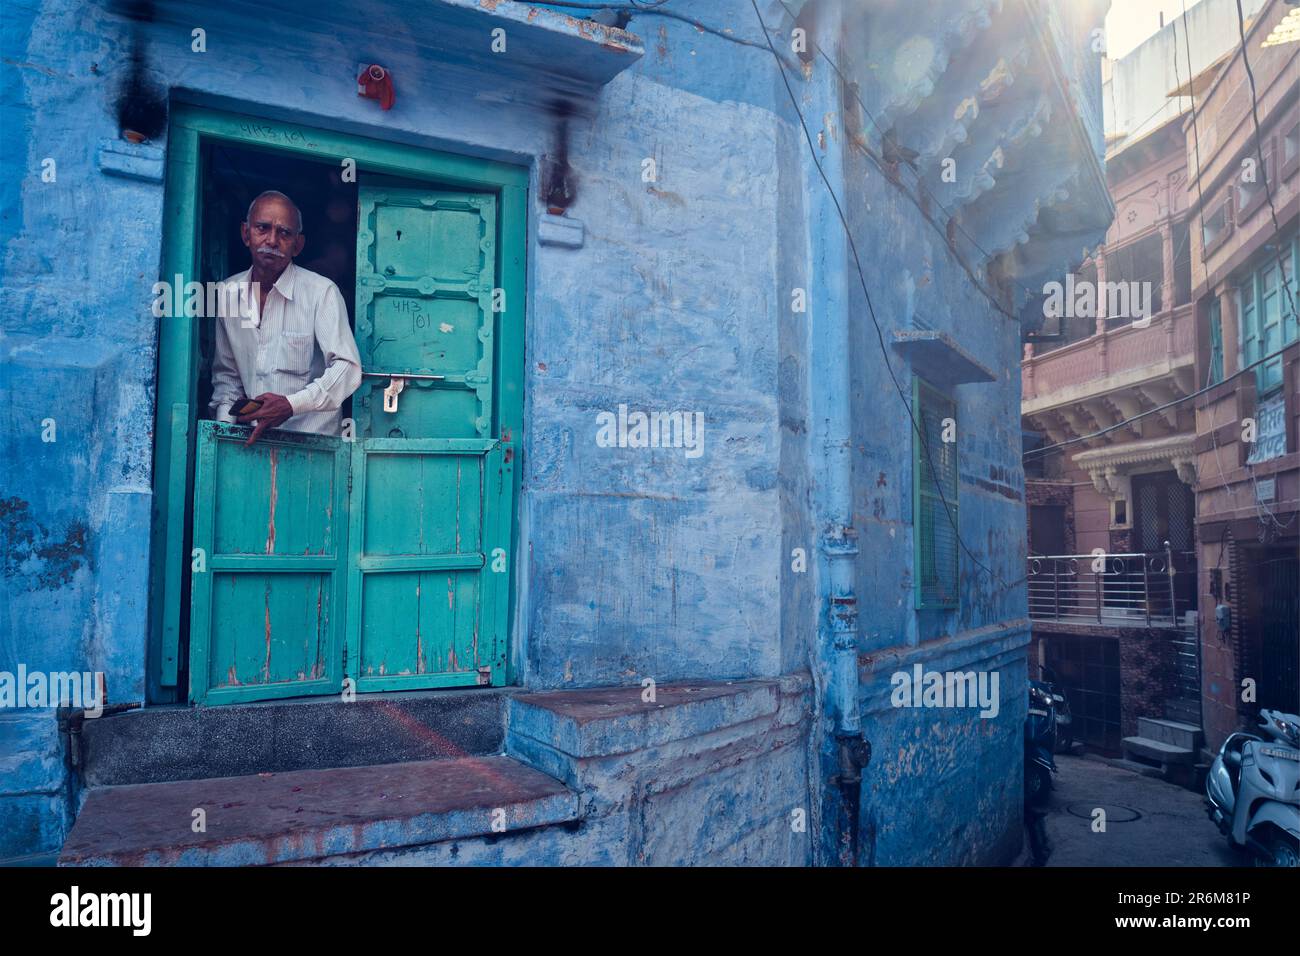 Indian man and his blue house in streets, Jodhpur, Rajasthan, India Stock Photo